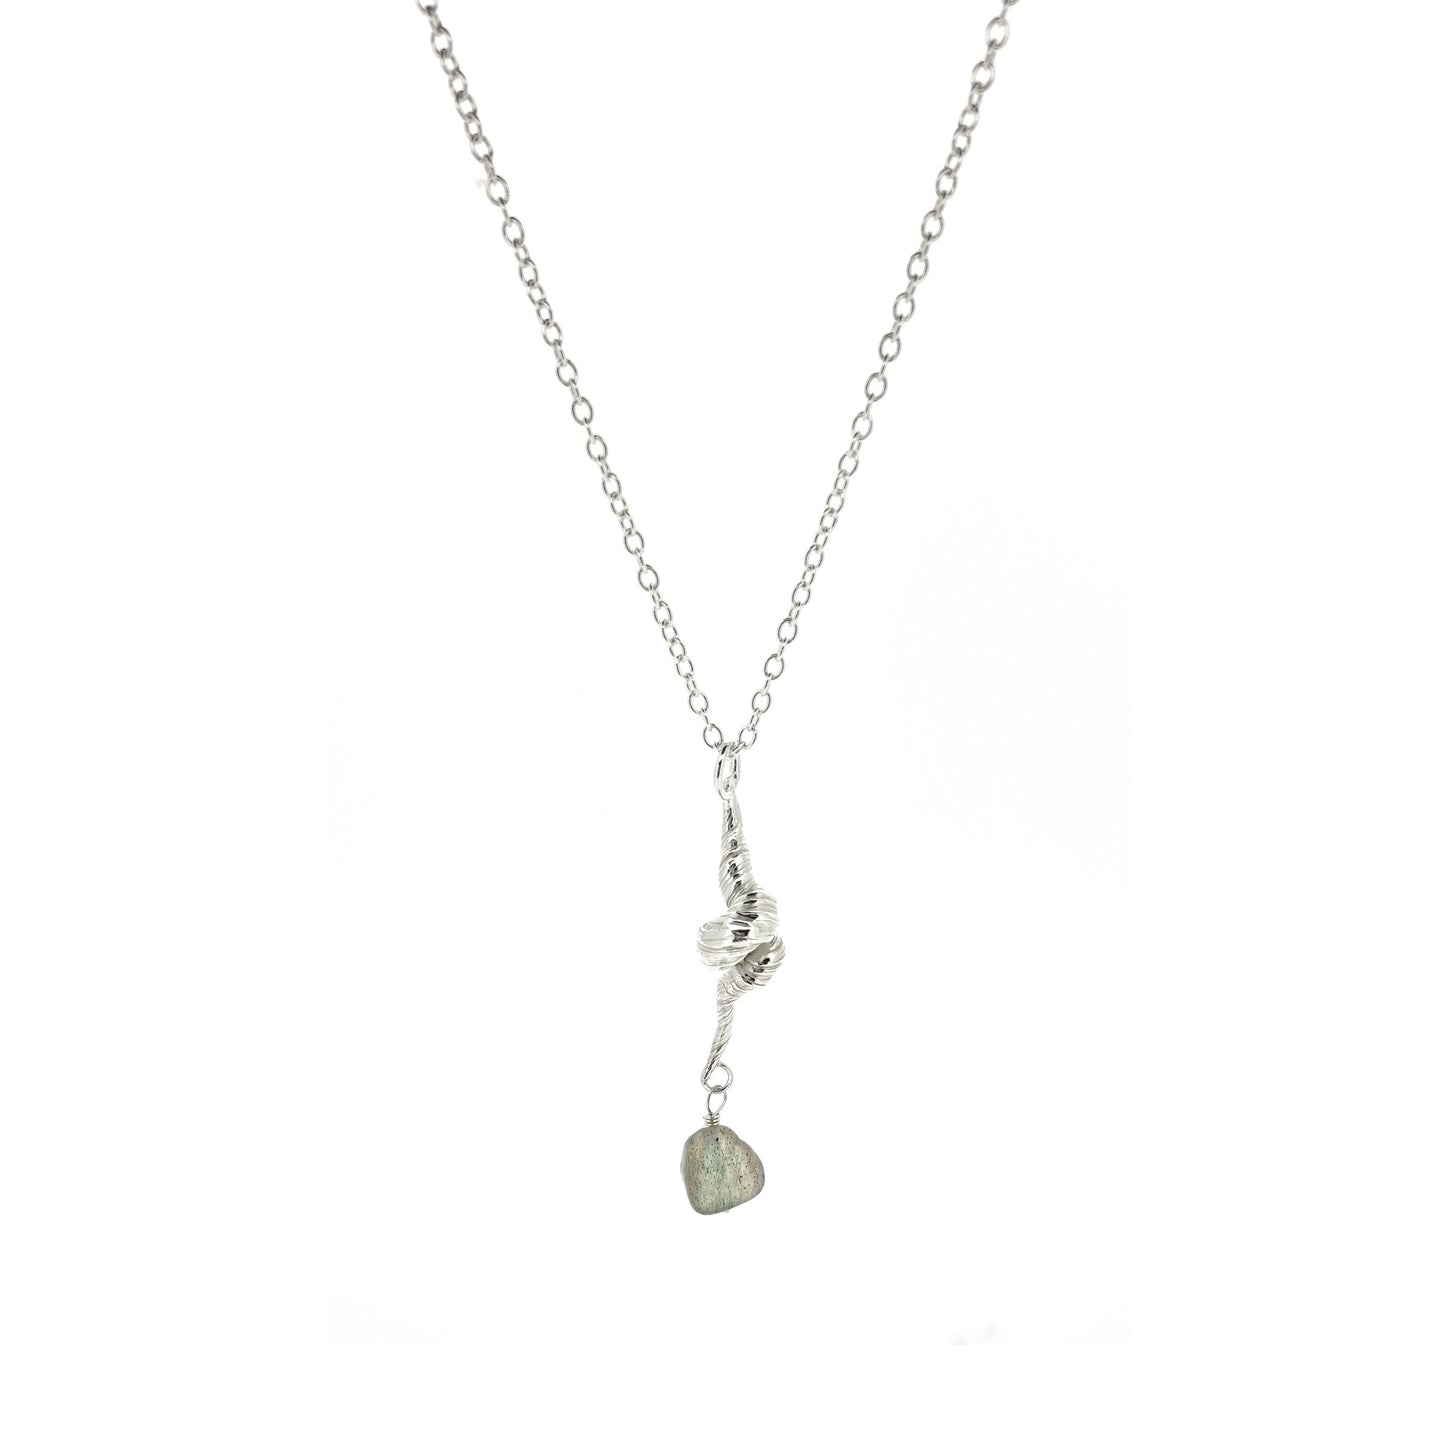 Silver twisted pendant with striations and a labradorite gemstone bead, on a silver chain.